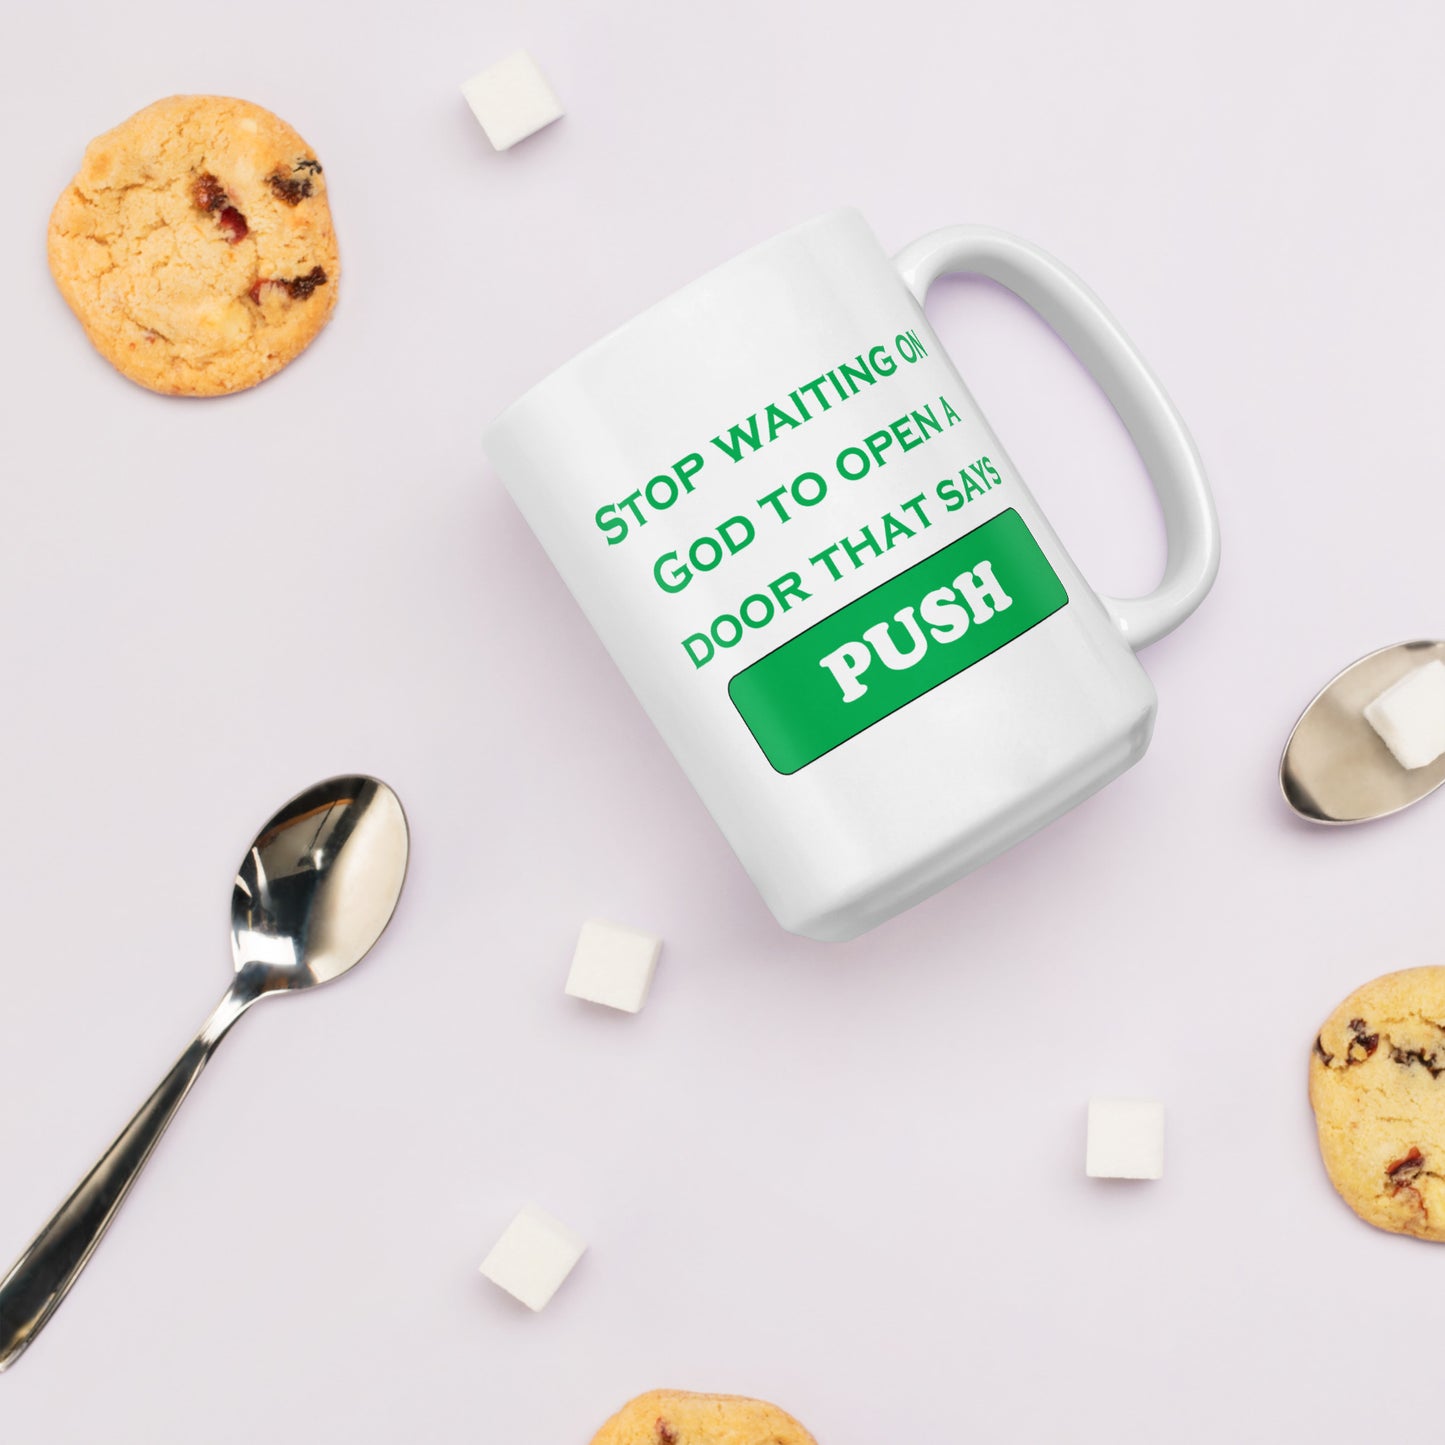 Stop Waiting on God to Open a Door White glossy mug - Green Print